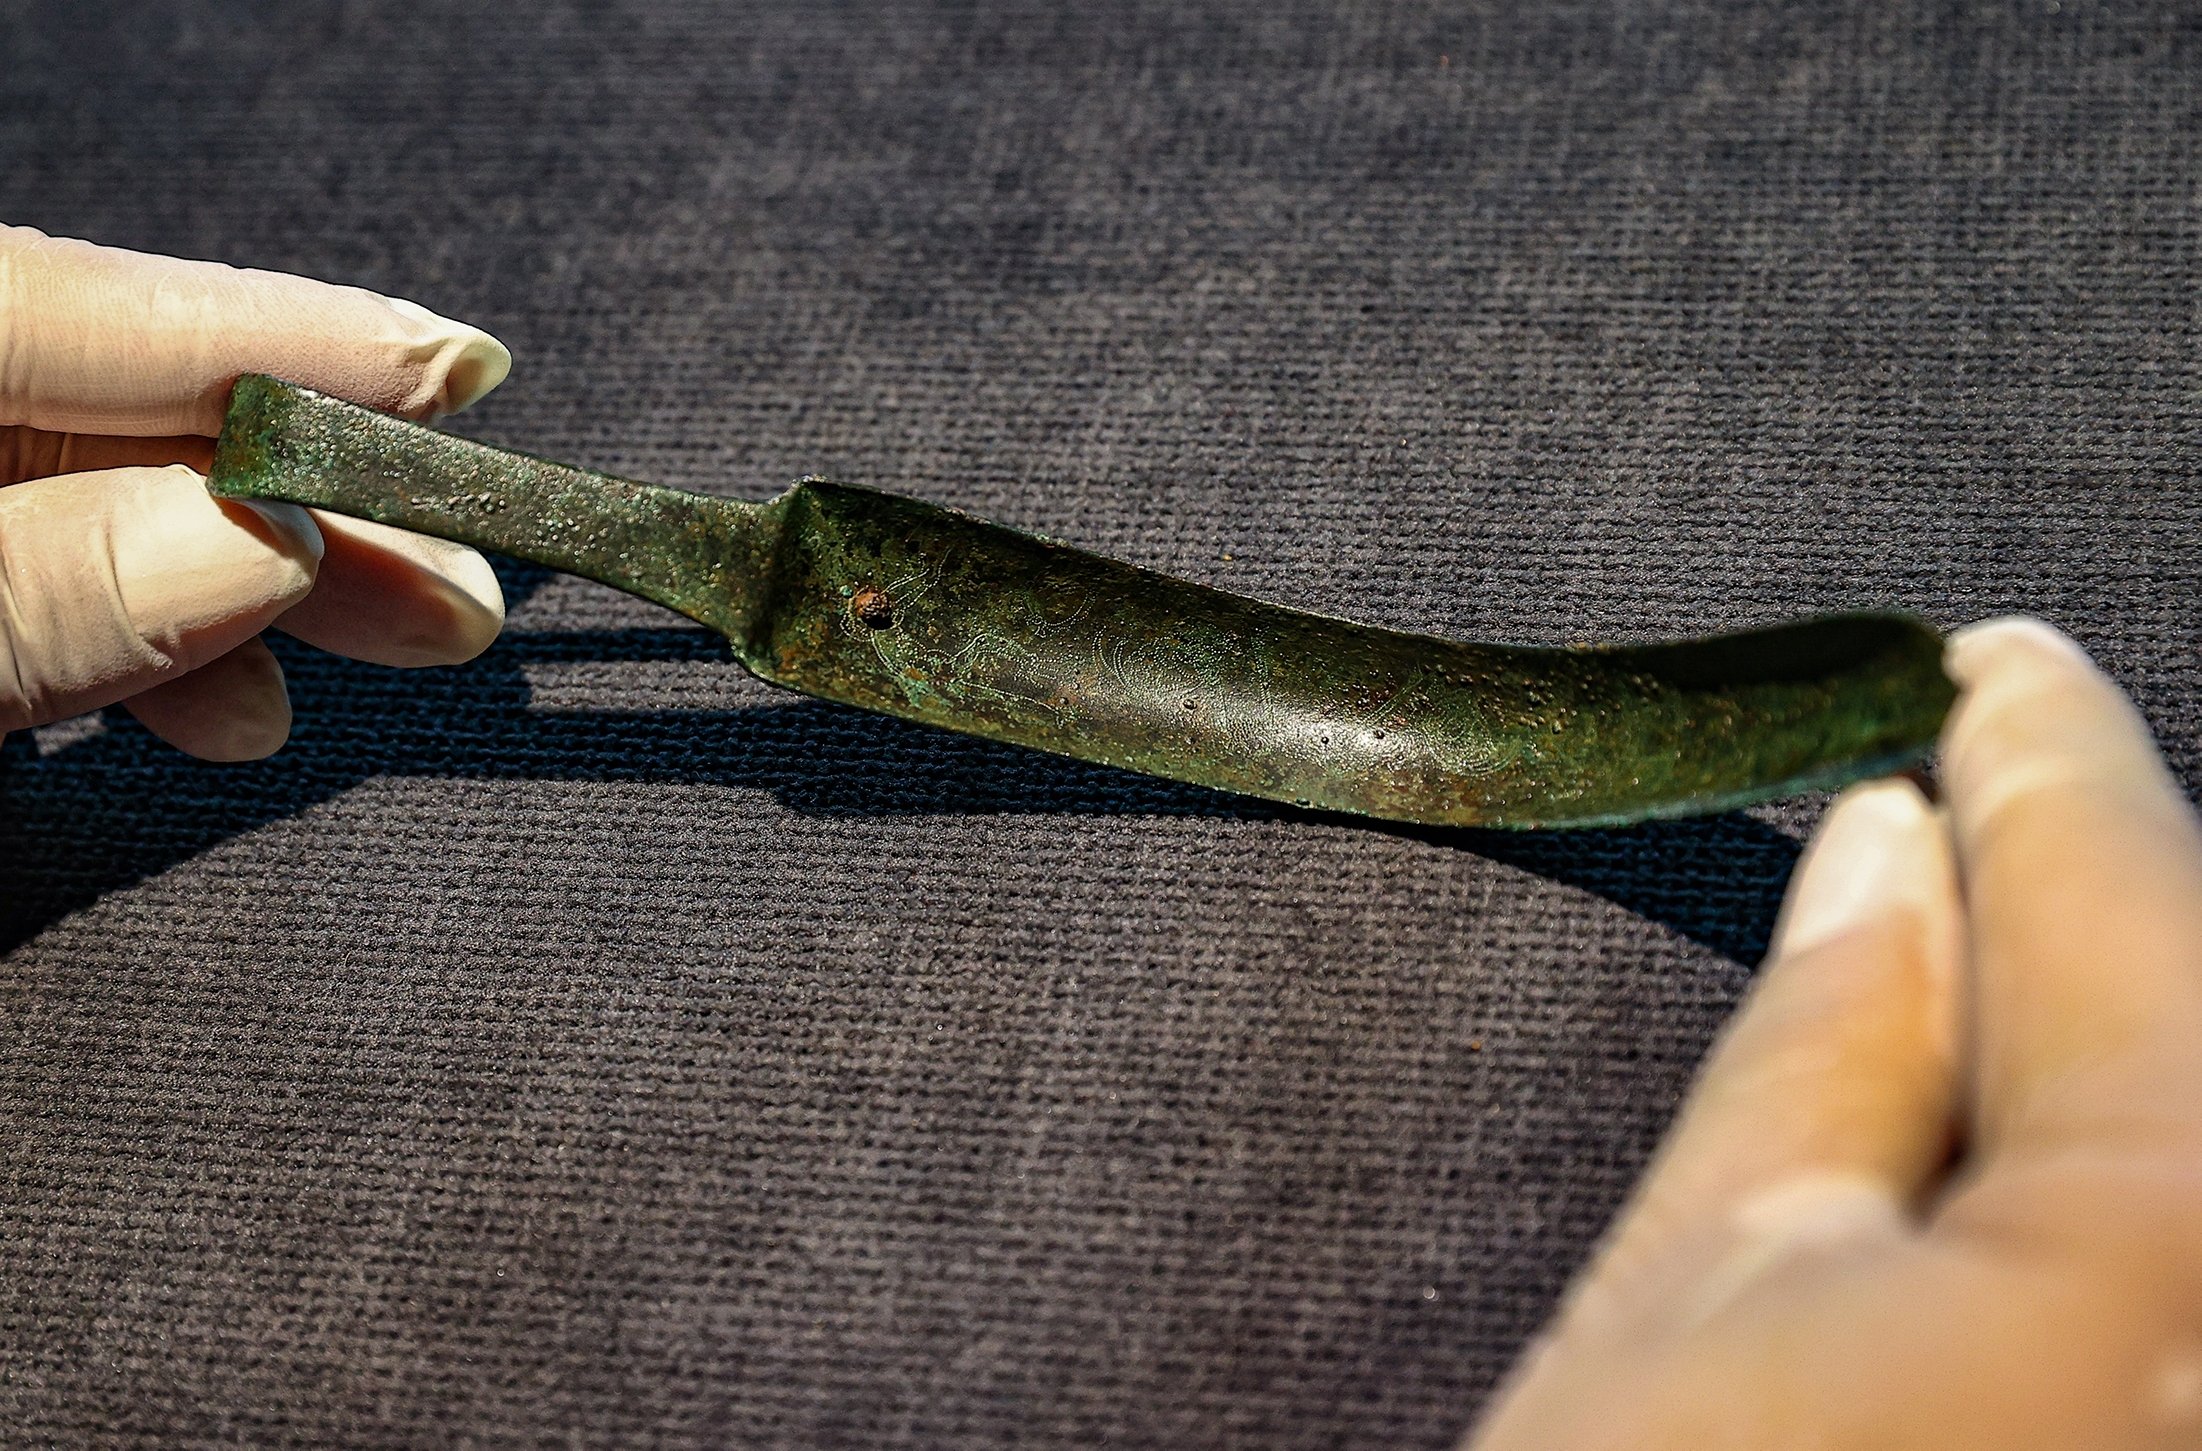 An official presents the ancient artifact known as a "strigil," a historical tool used for cleansing gladiators, on exhibition at Izmir Archaeological Museum in Izmir, Turkey, July 15, 2021. (AA Photo)